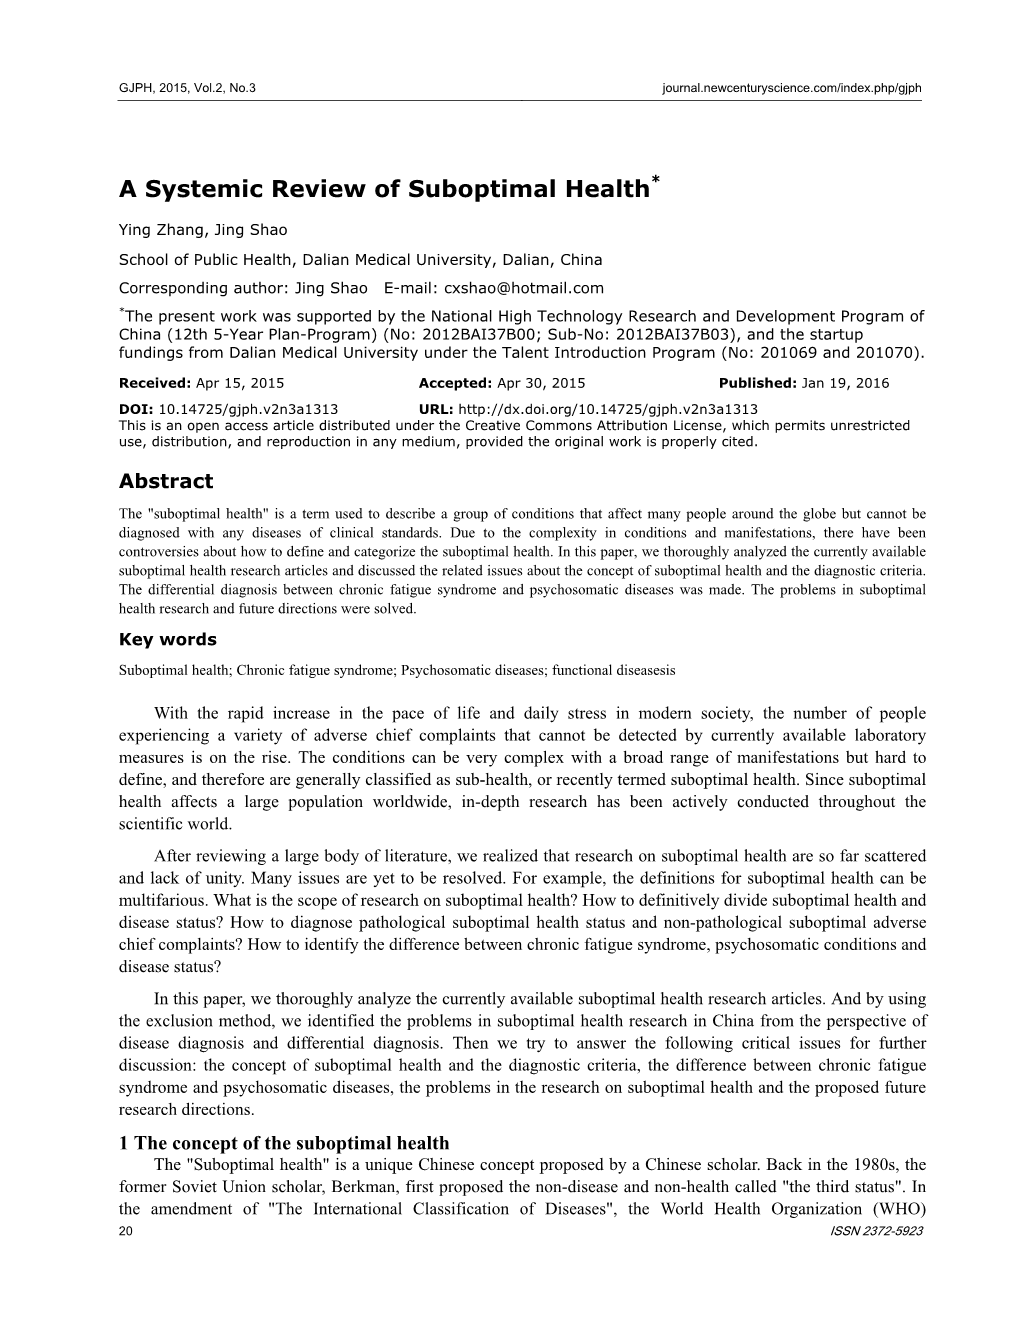 A Systemic Review of Suboptimal Health*